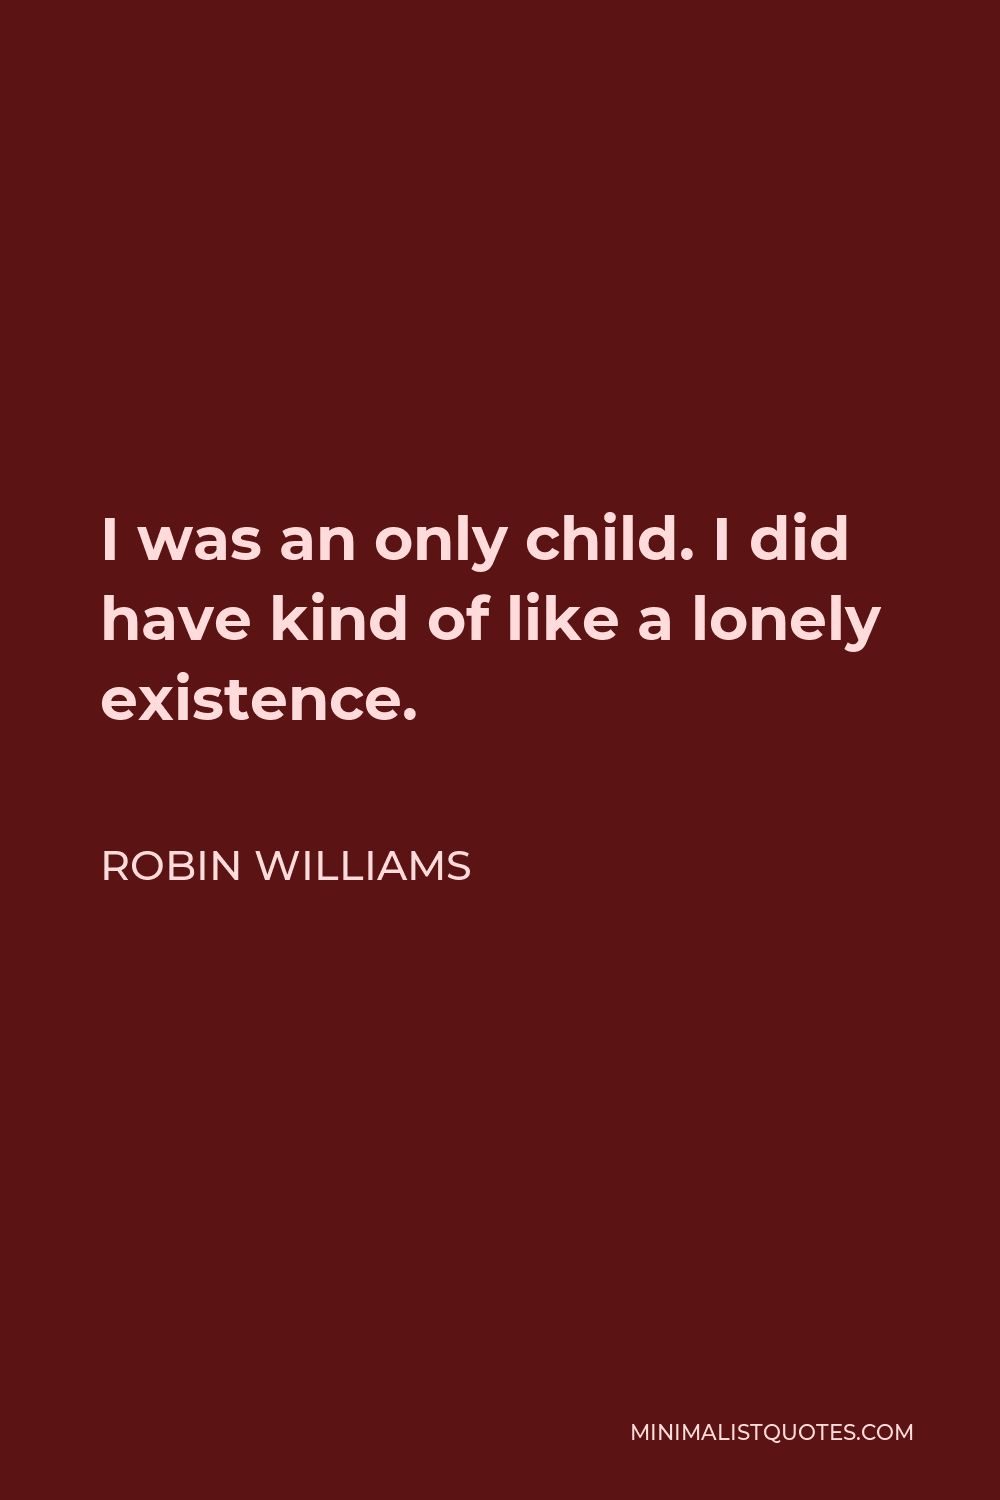 Robin Williams Quote - I was an only child. I did have kind of like a lonely existence.